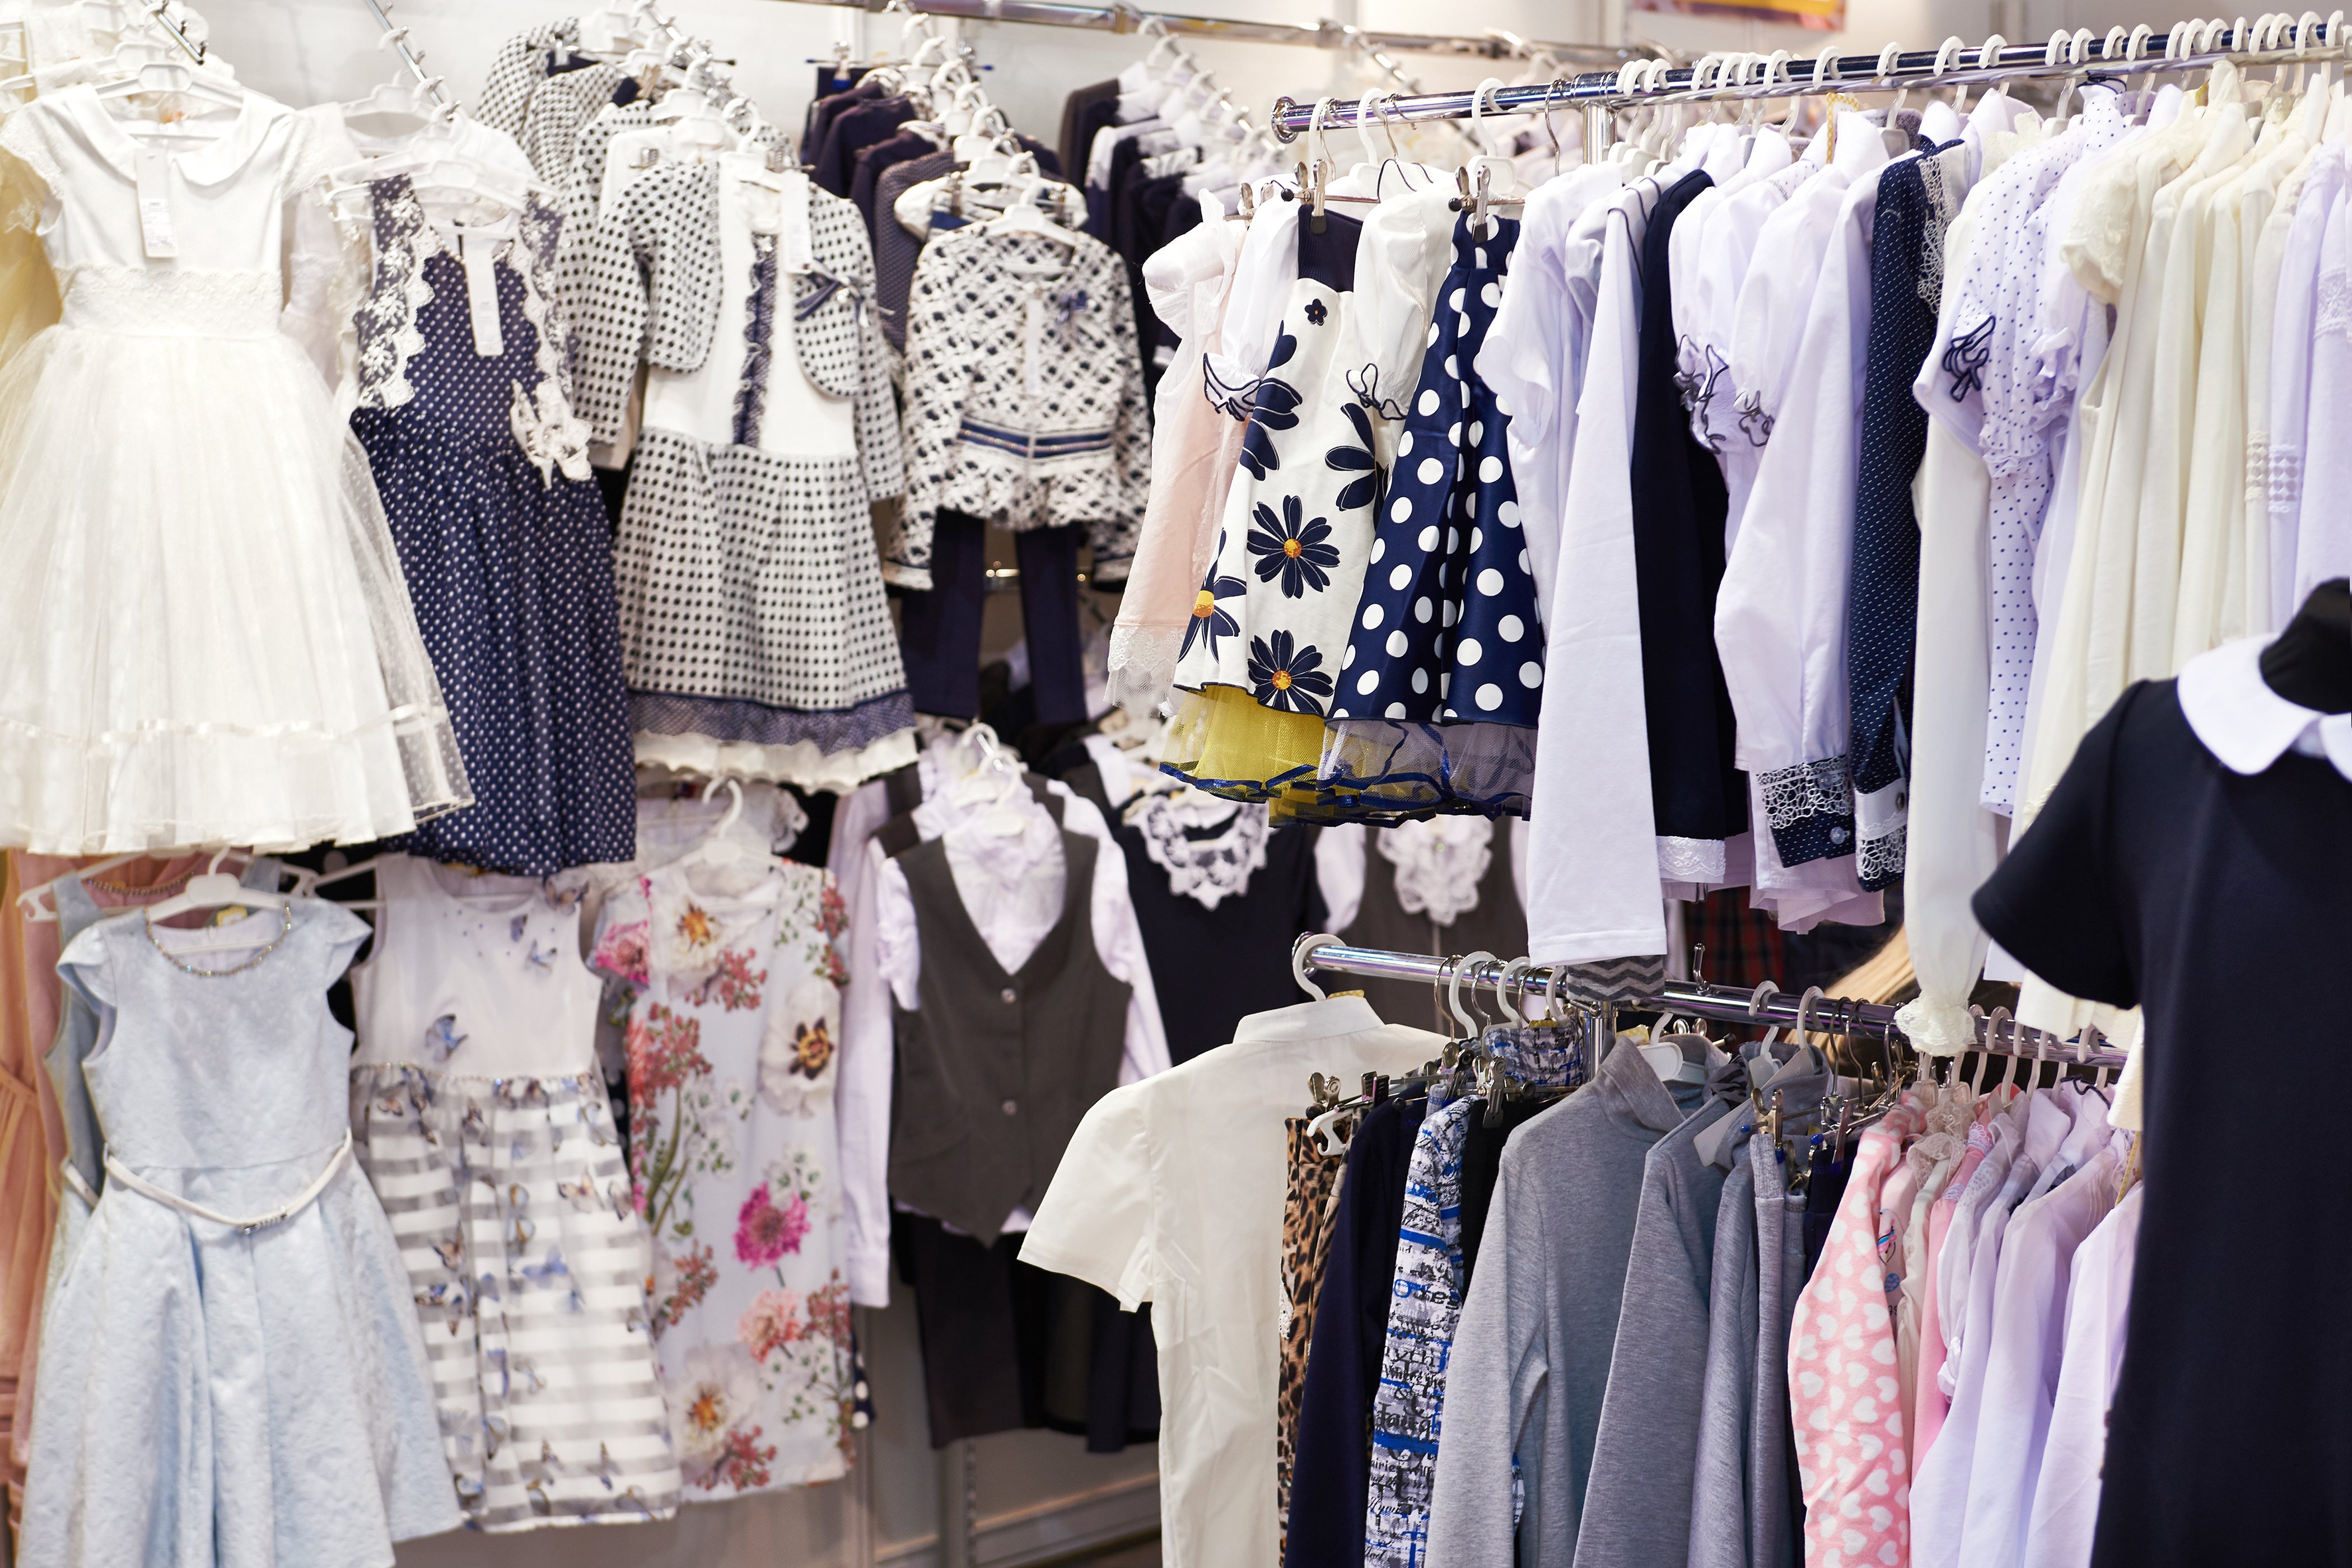 Clothing retailers increased prices as shops reopened from 12 April